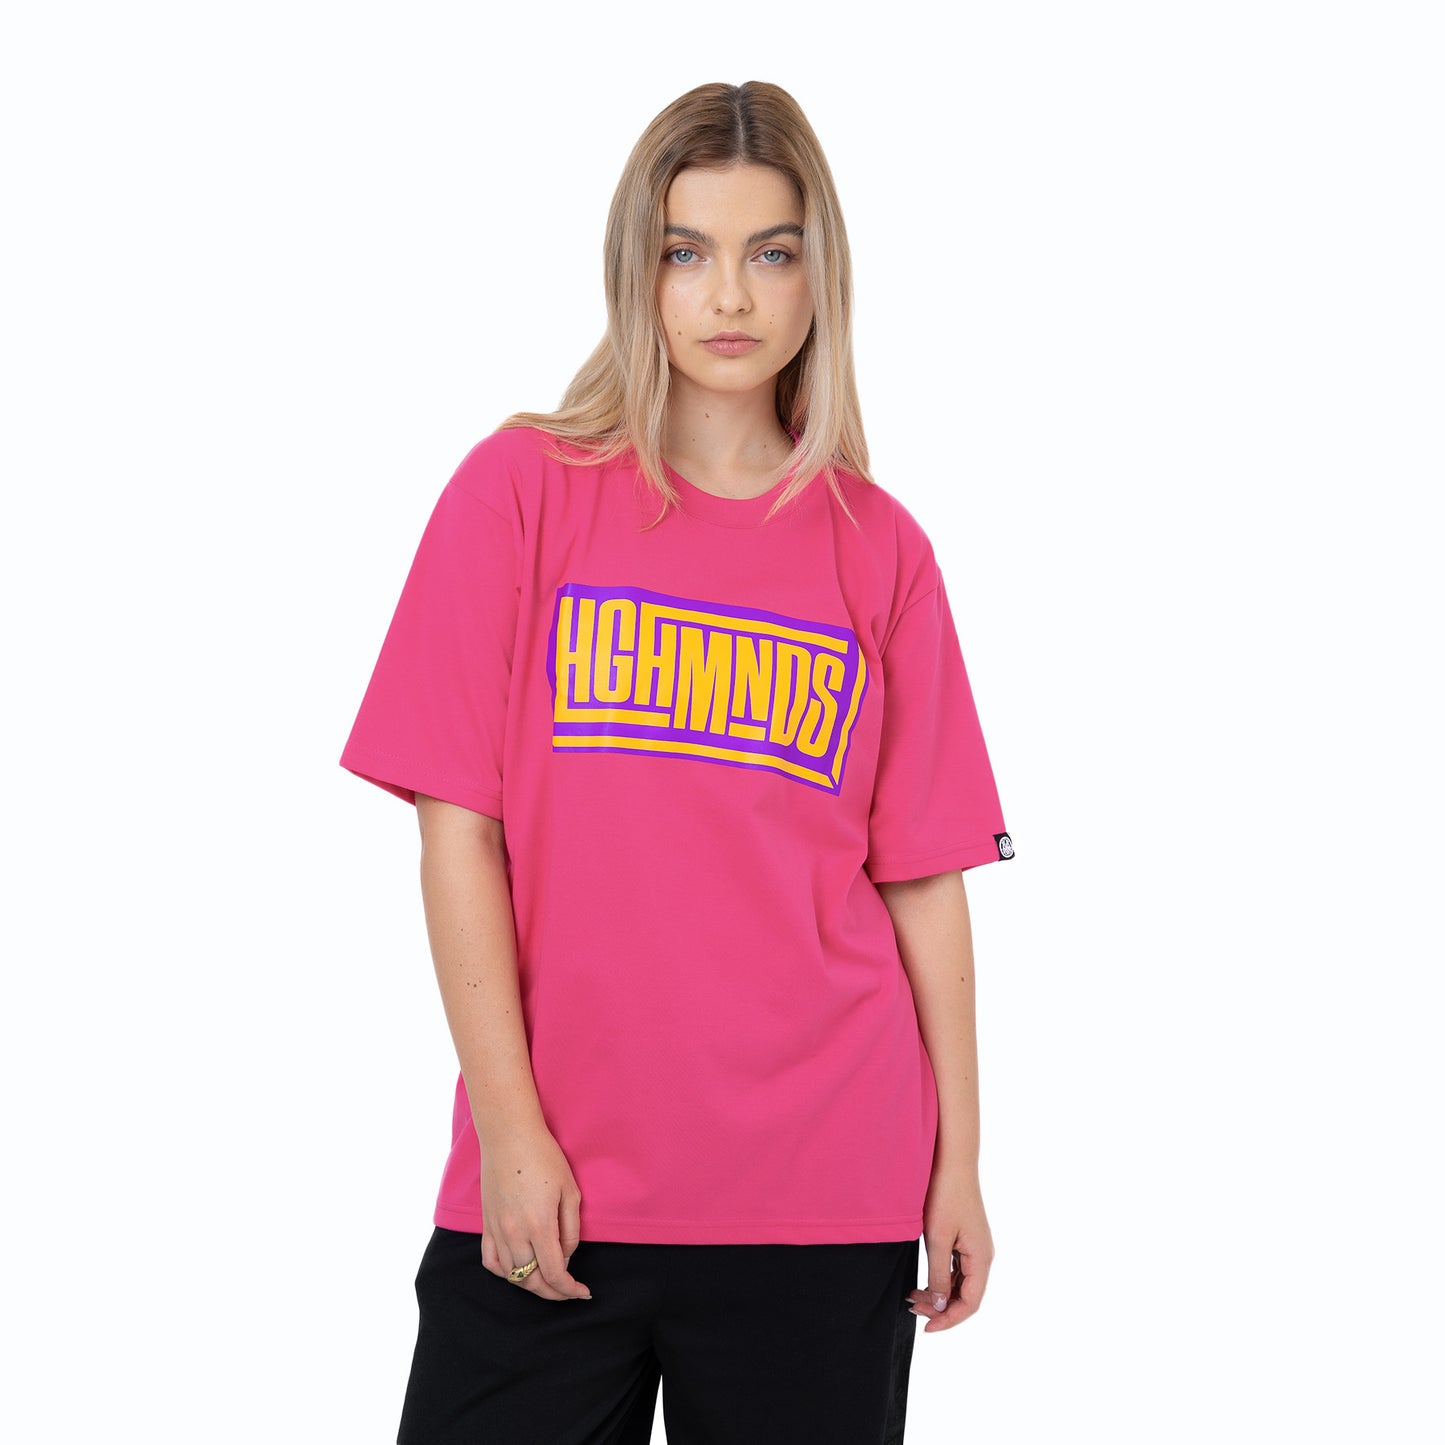 Connections Tee